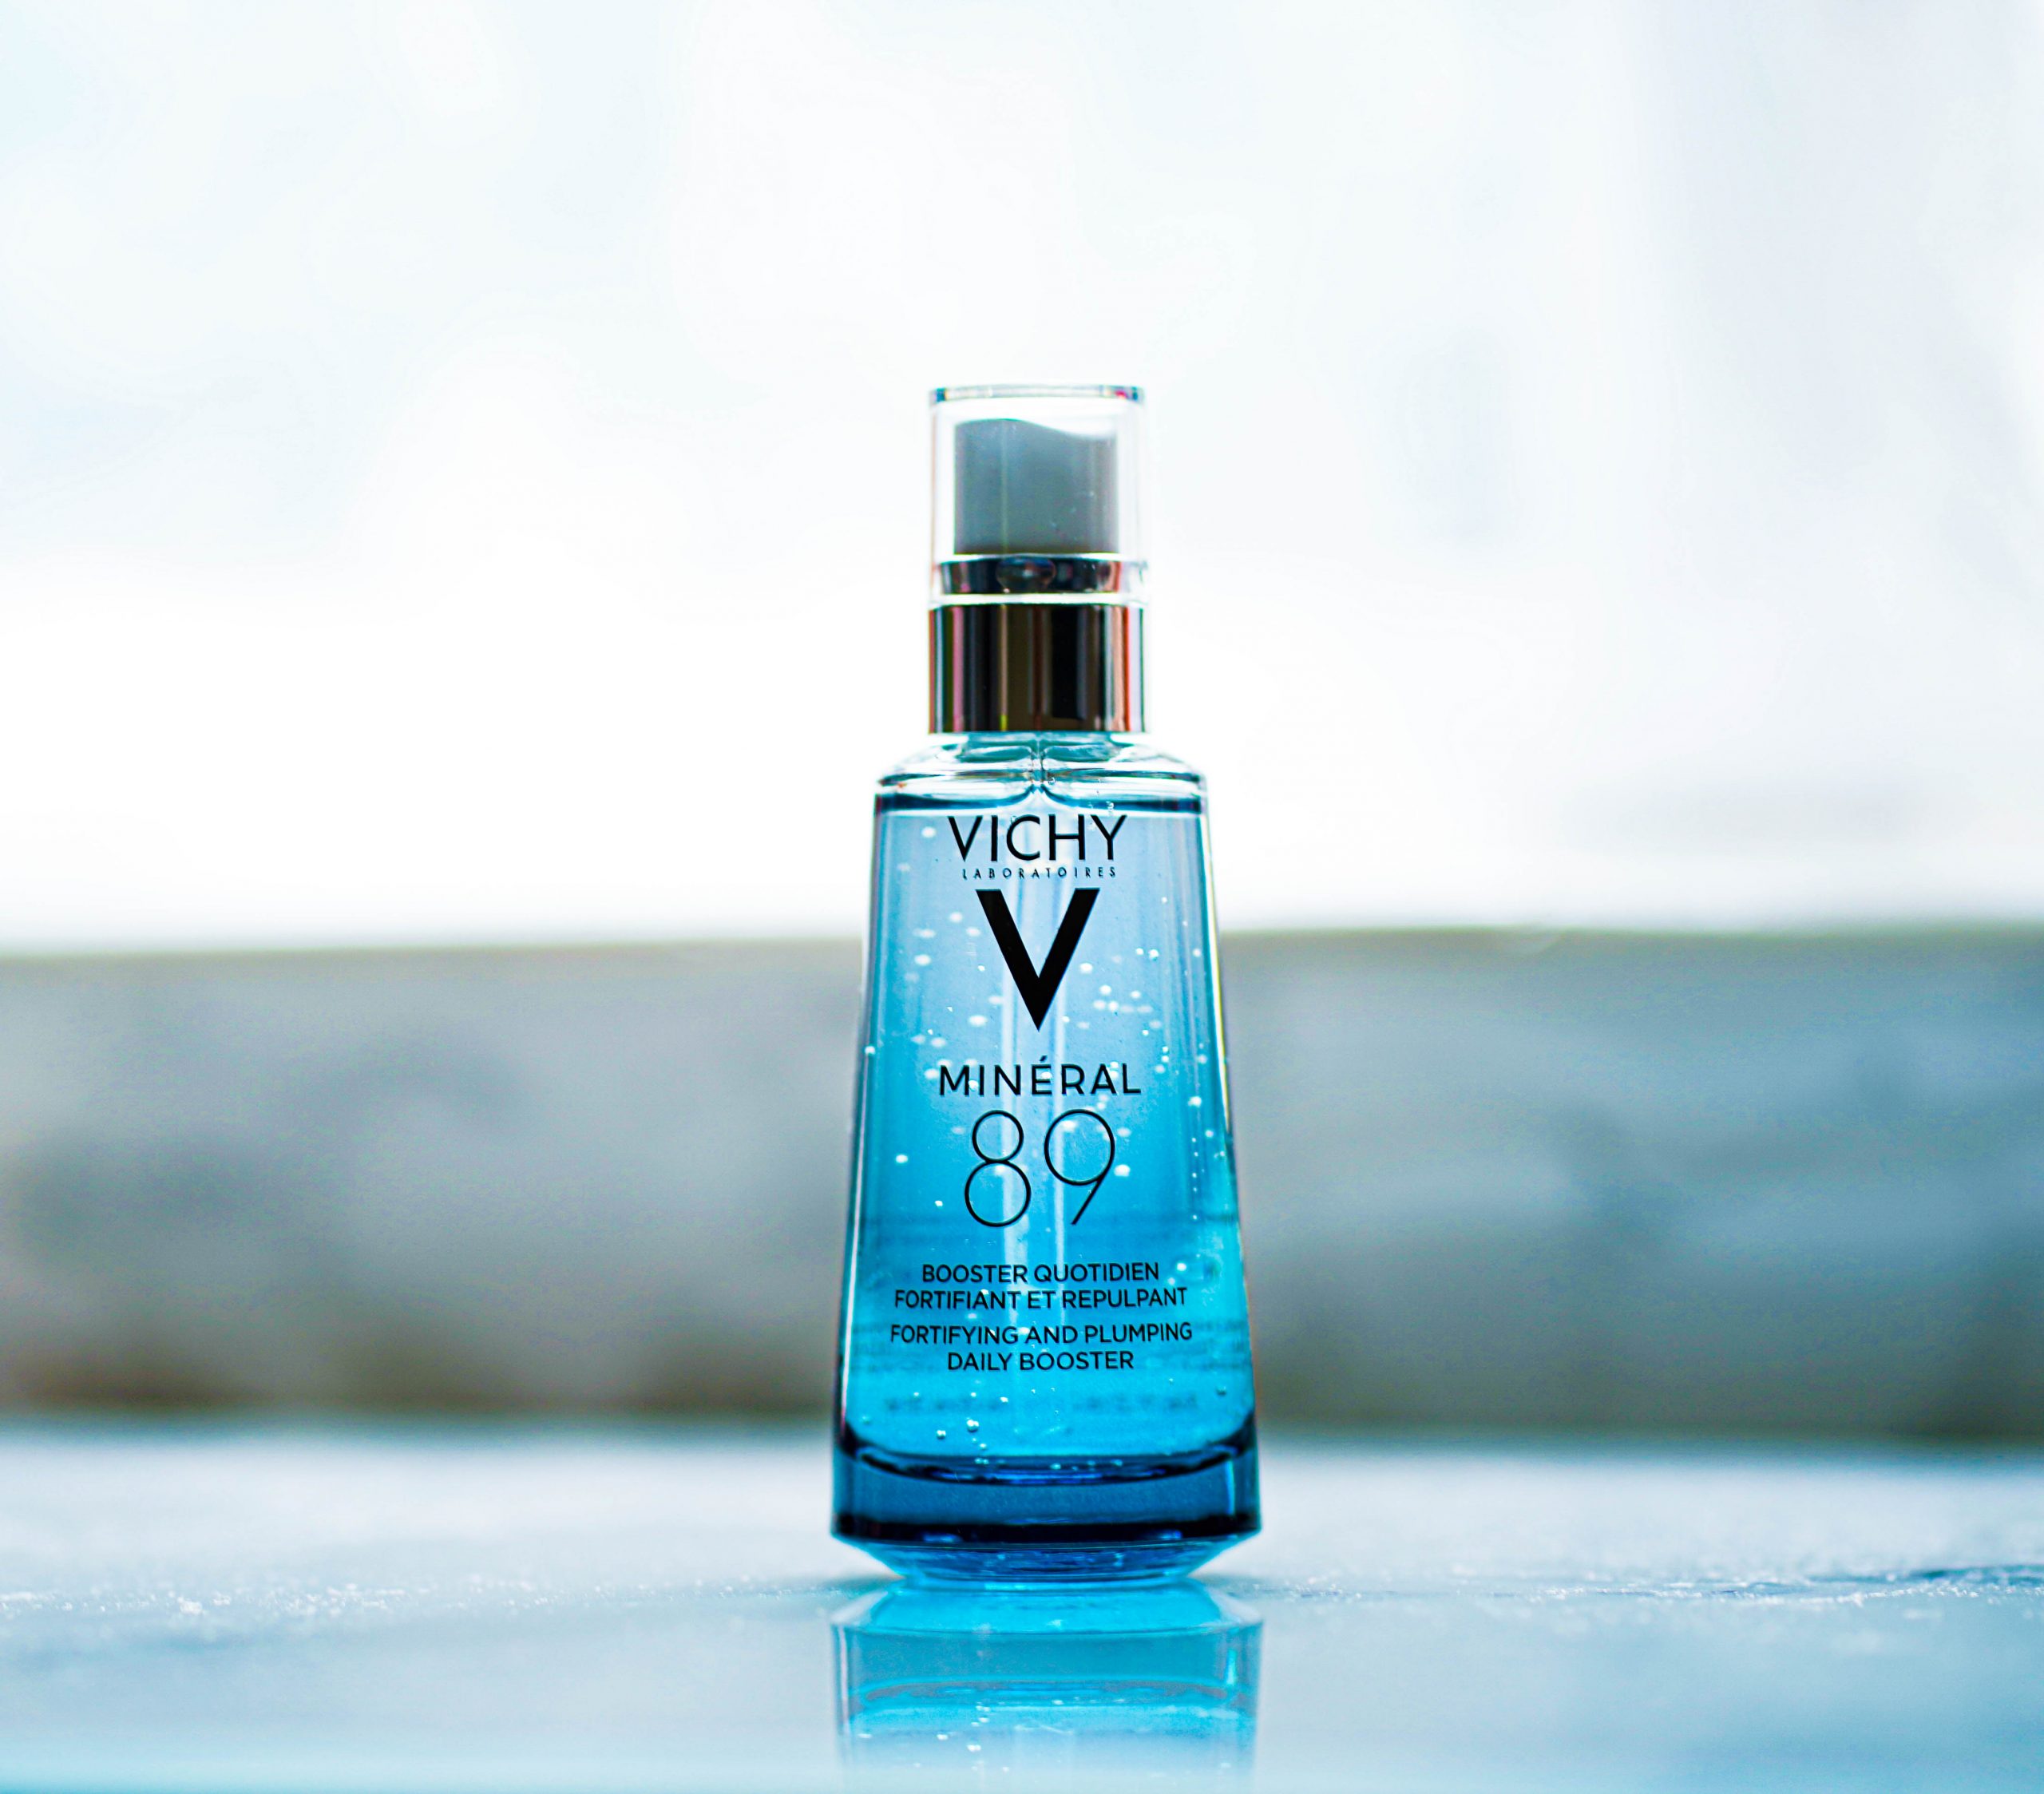 Vichy Mineral 89 Hyaluronic Acid Booster (Five Uses)